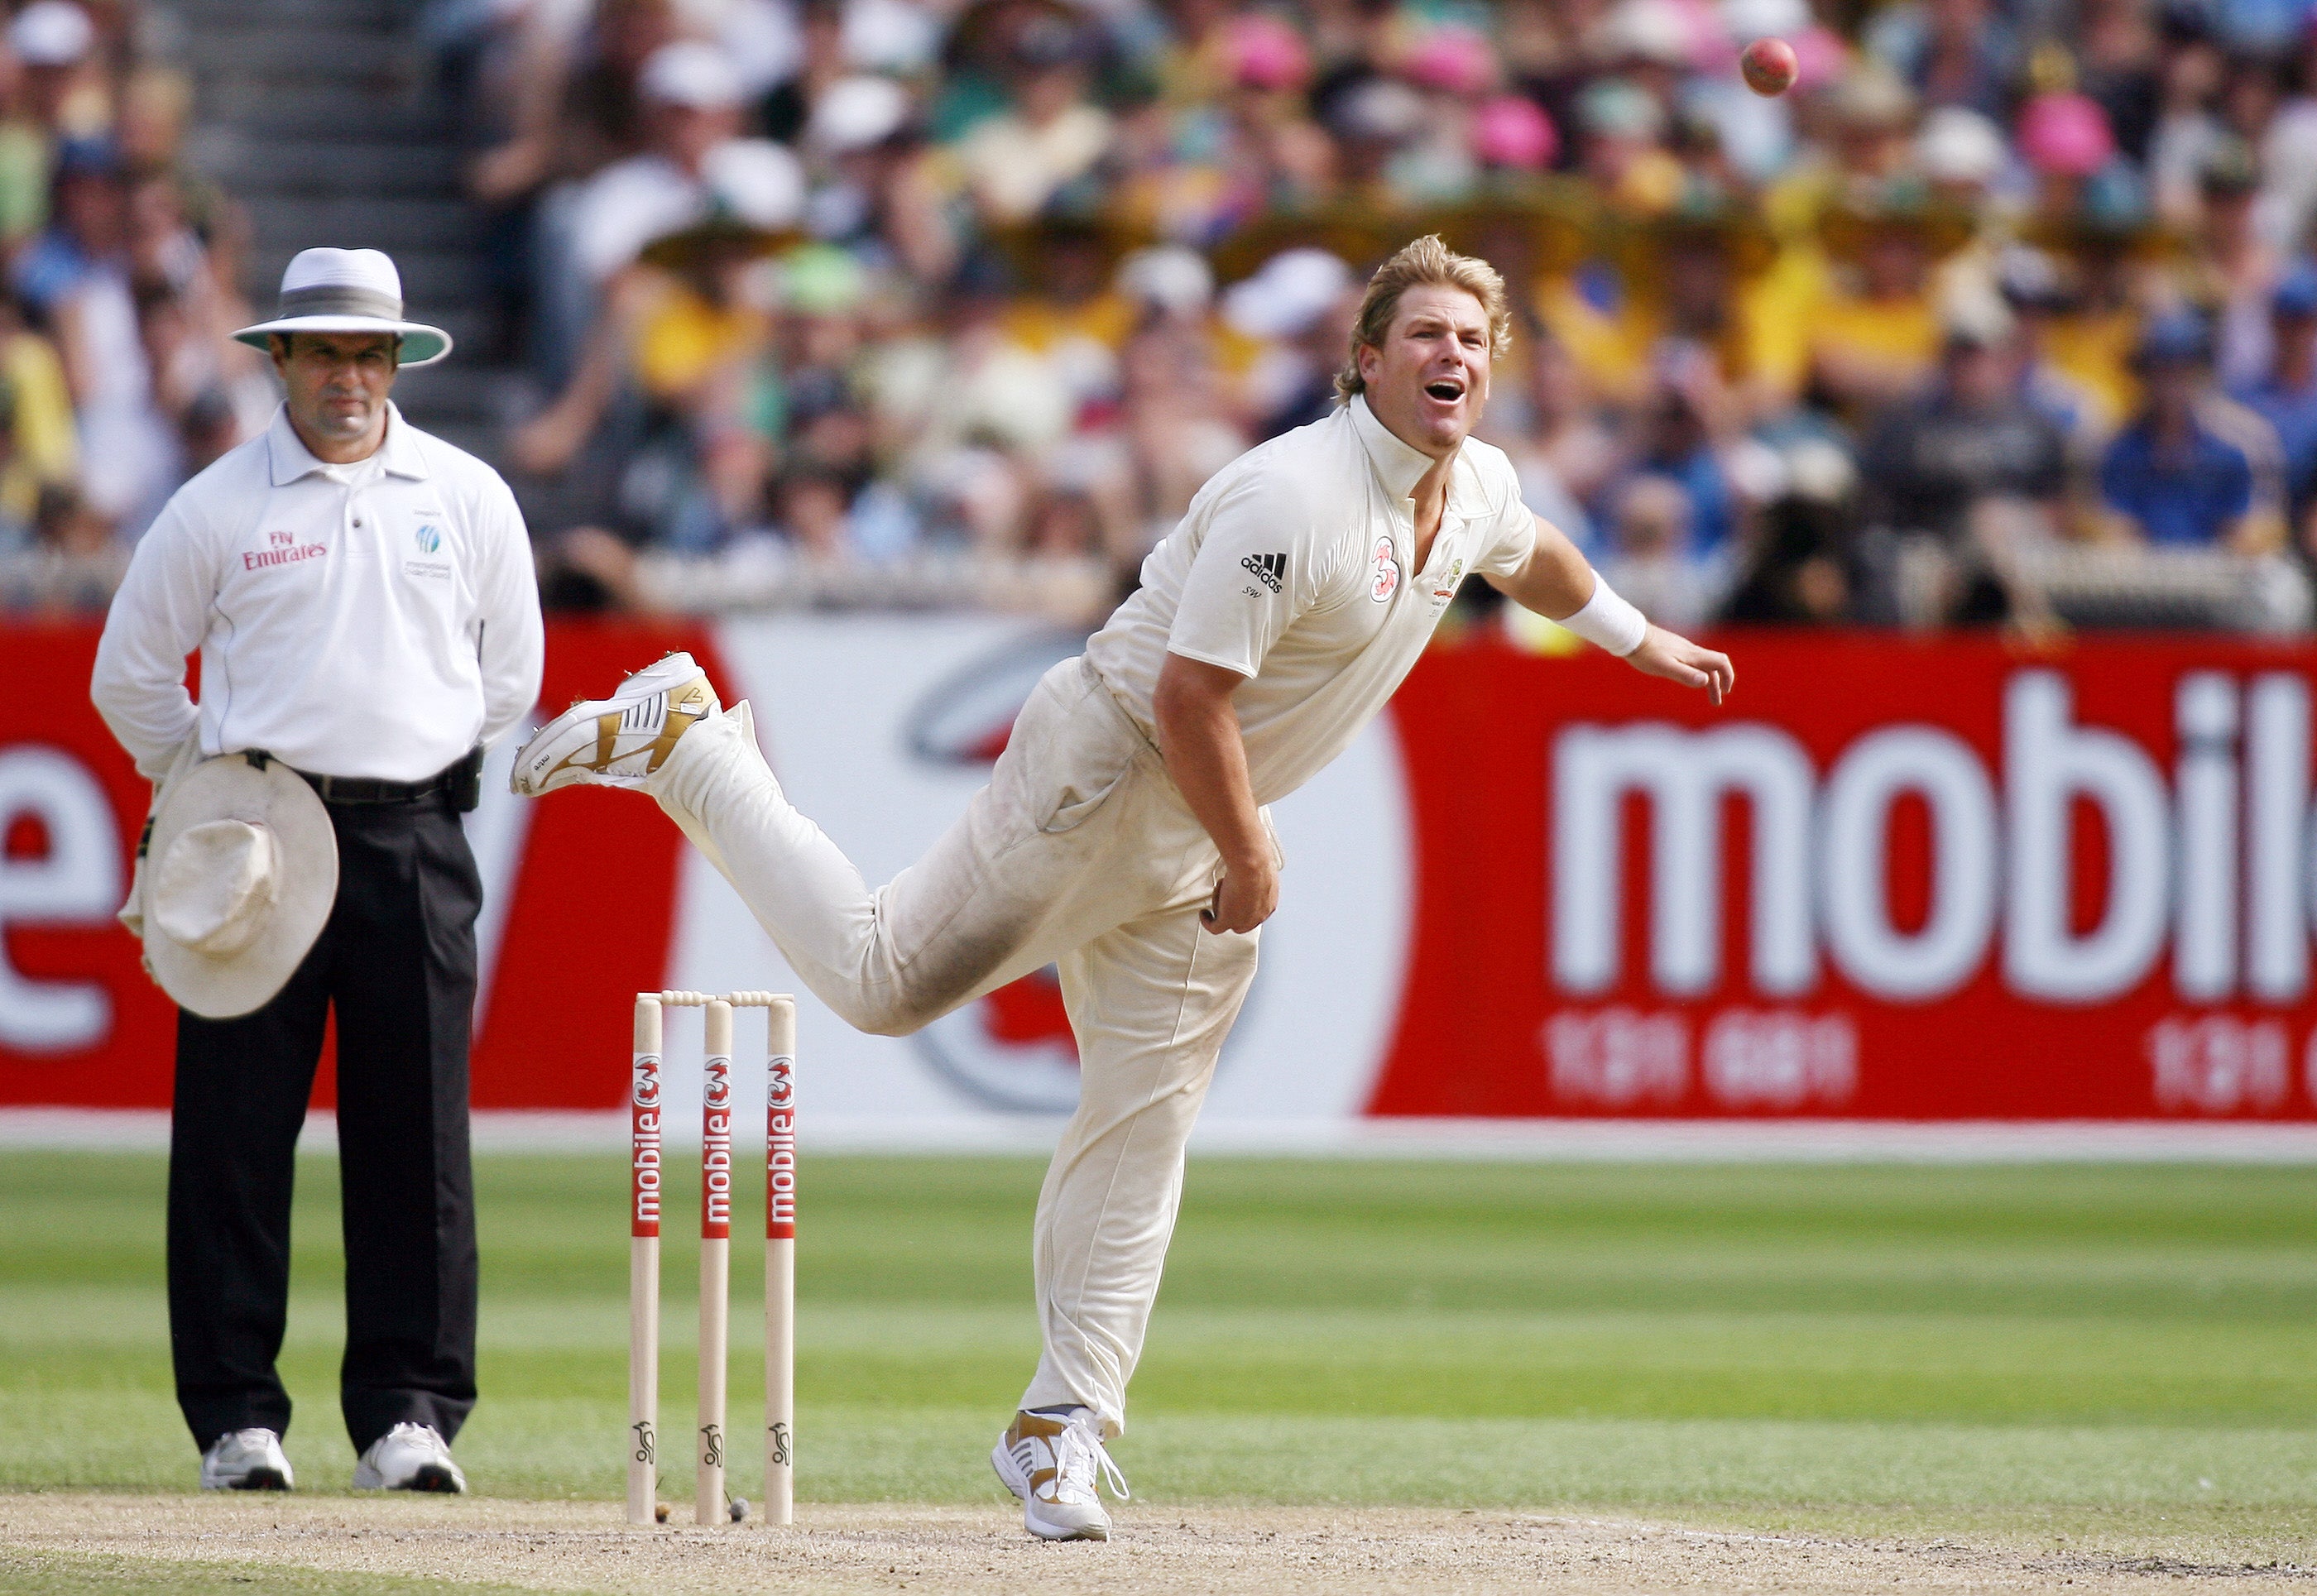 Warne was a master spin bowler